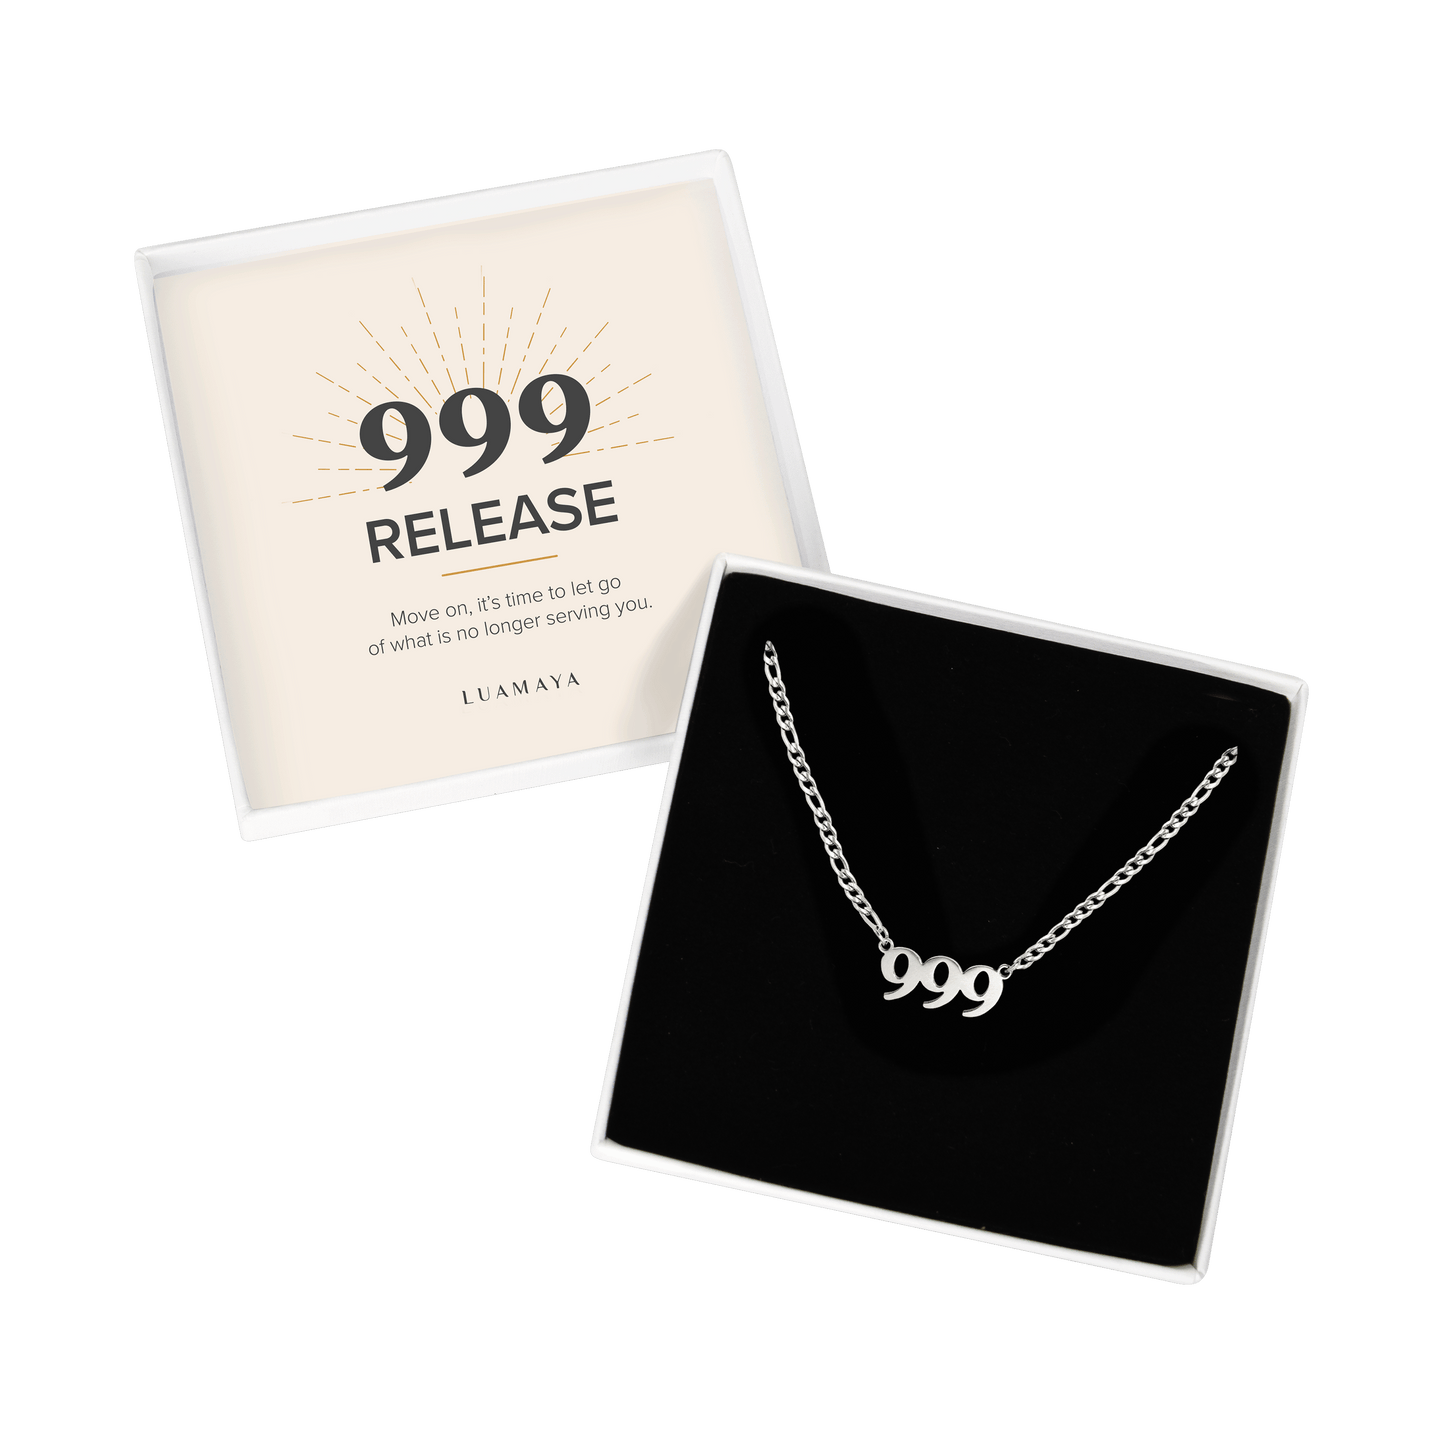 Angel Number 999 Necklace Silver